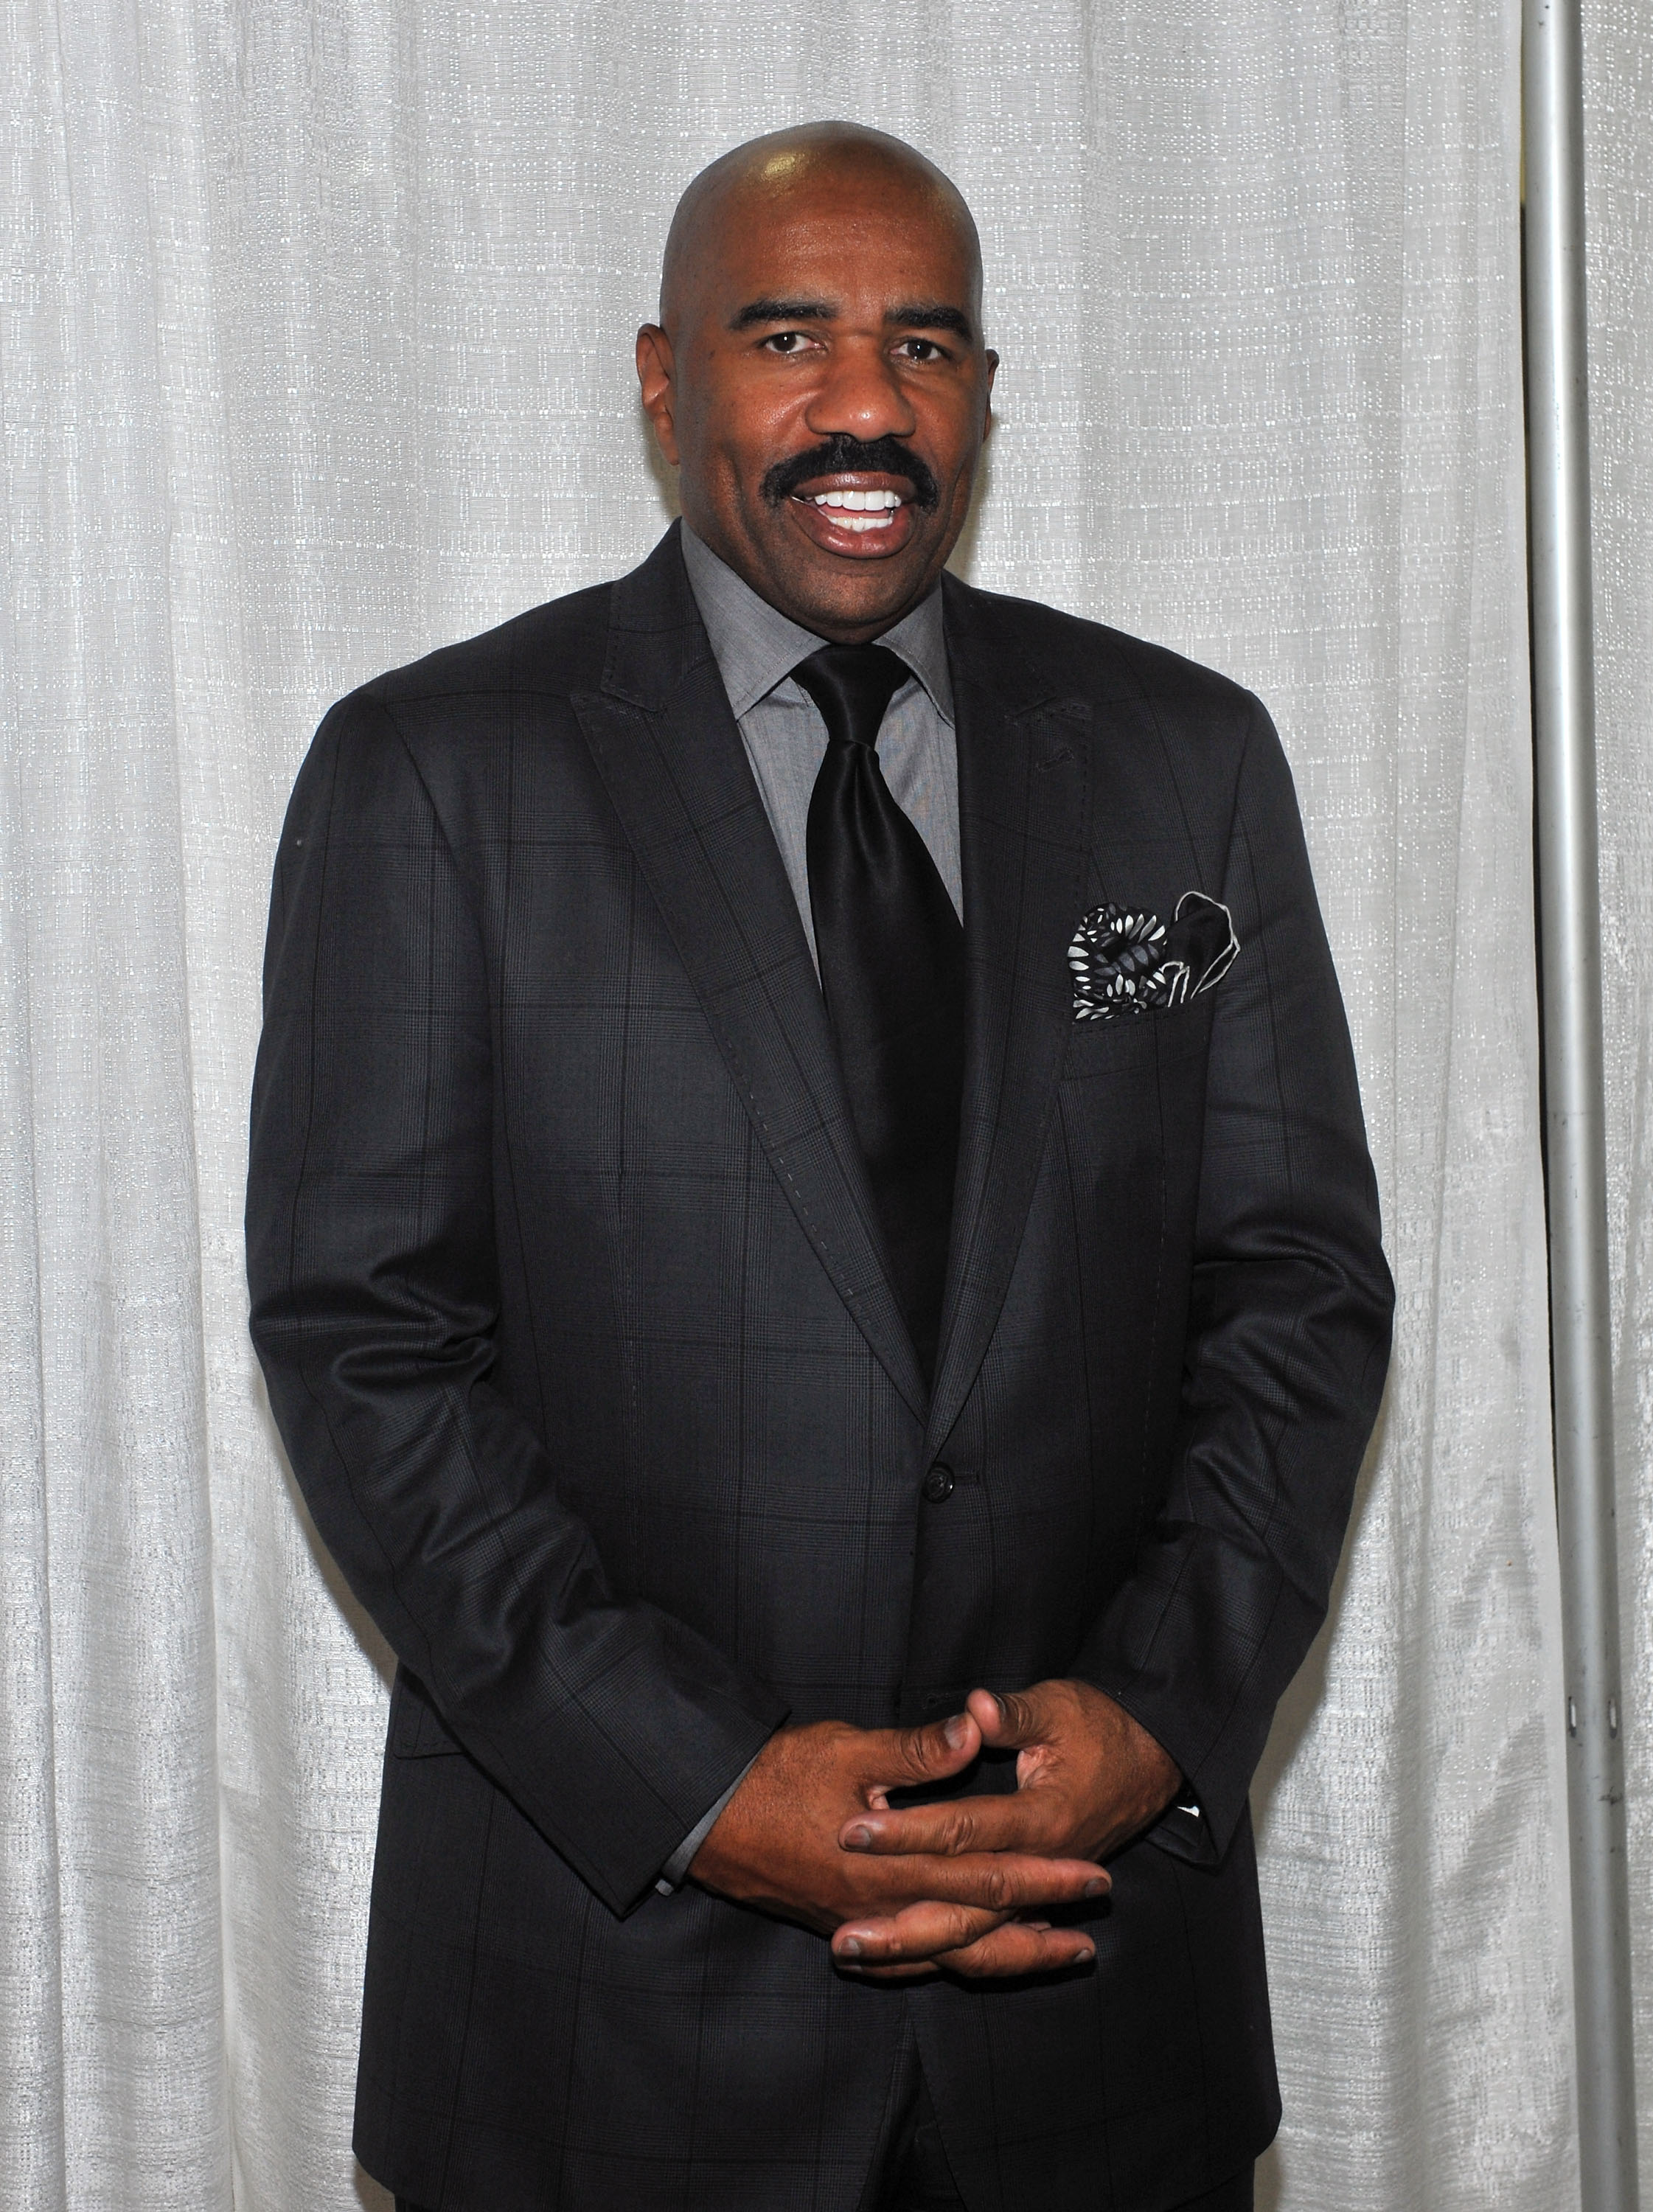 Steve Harvey at the 2011 Steve Harvey Mentoring Weekend at the Jacob Javits Center on October 7, 2011 in New York City. | Source: Getty